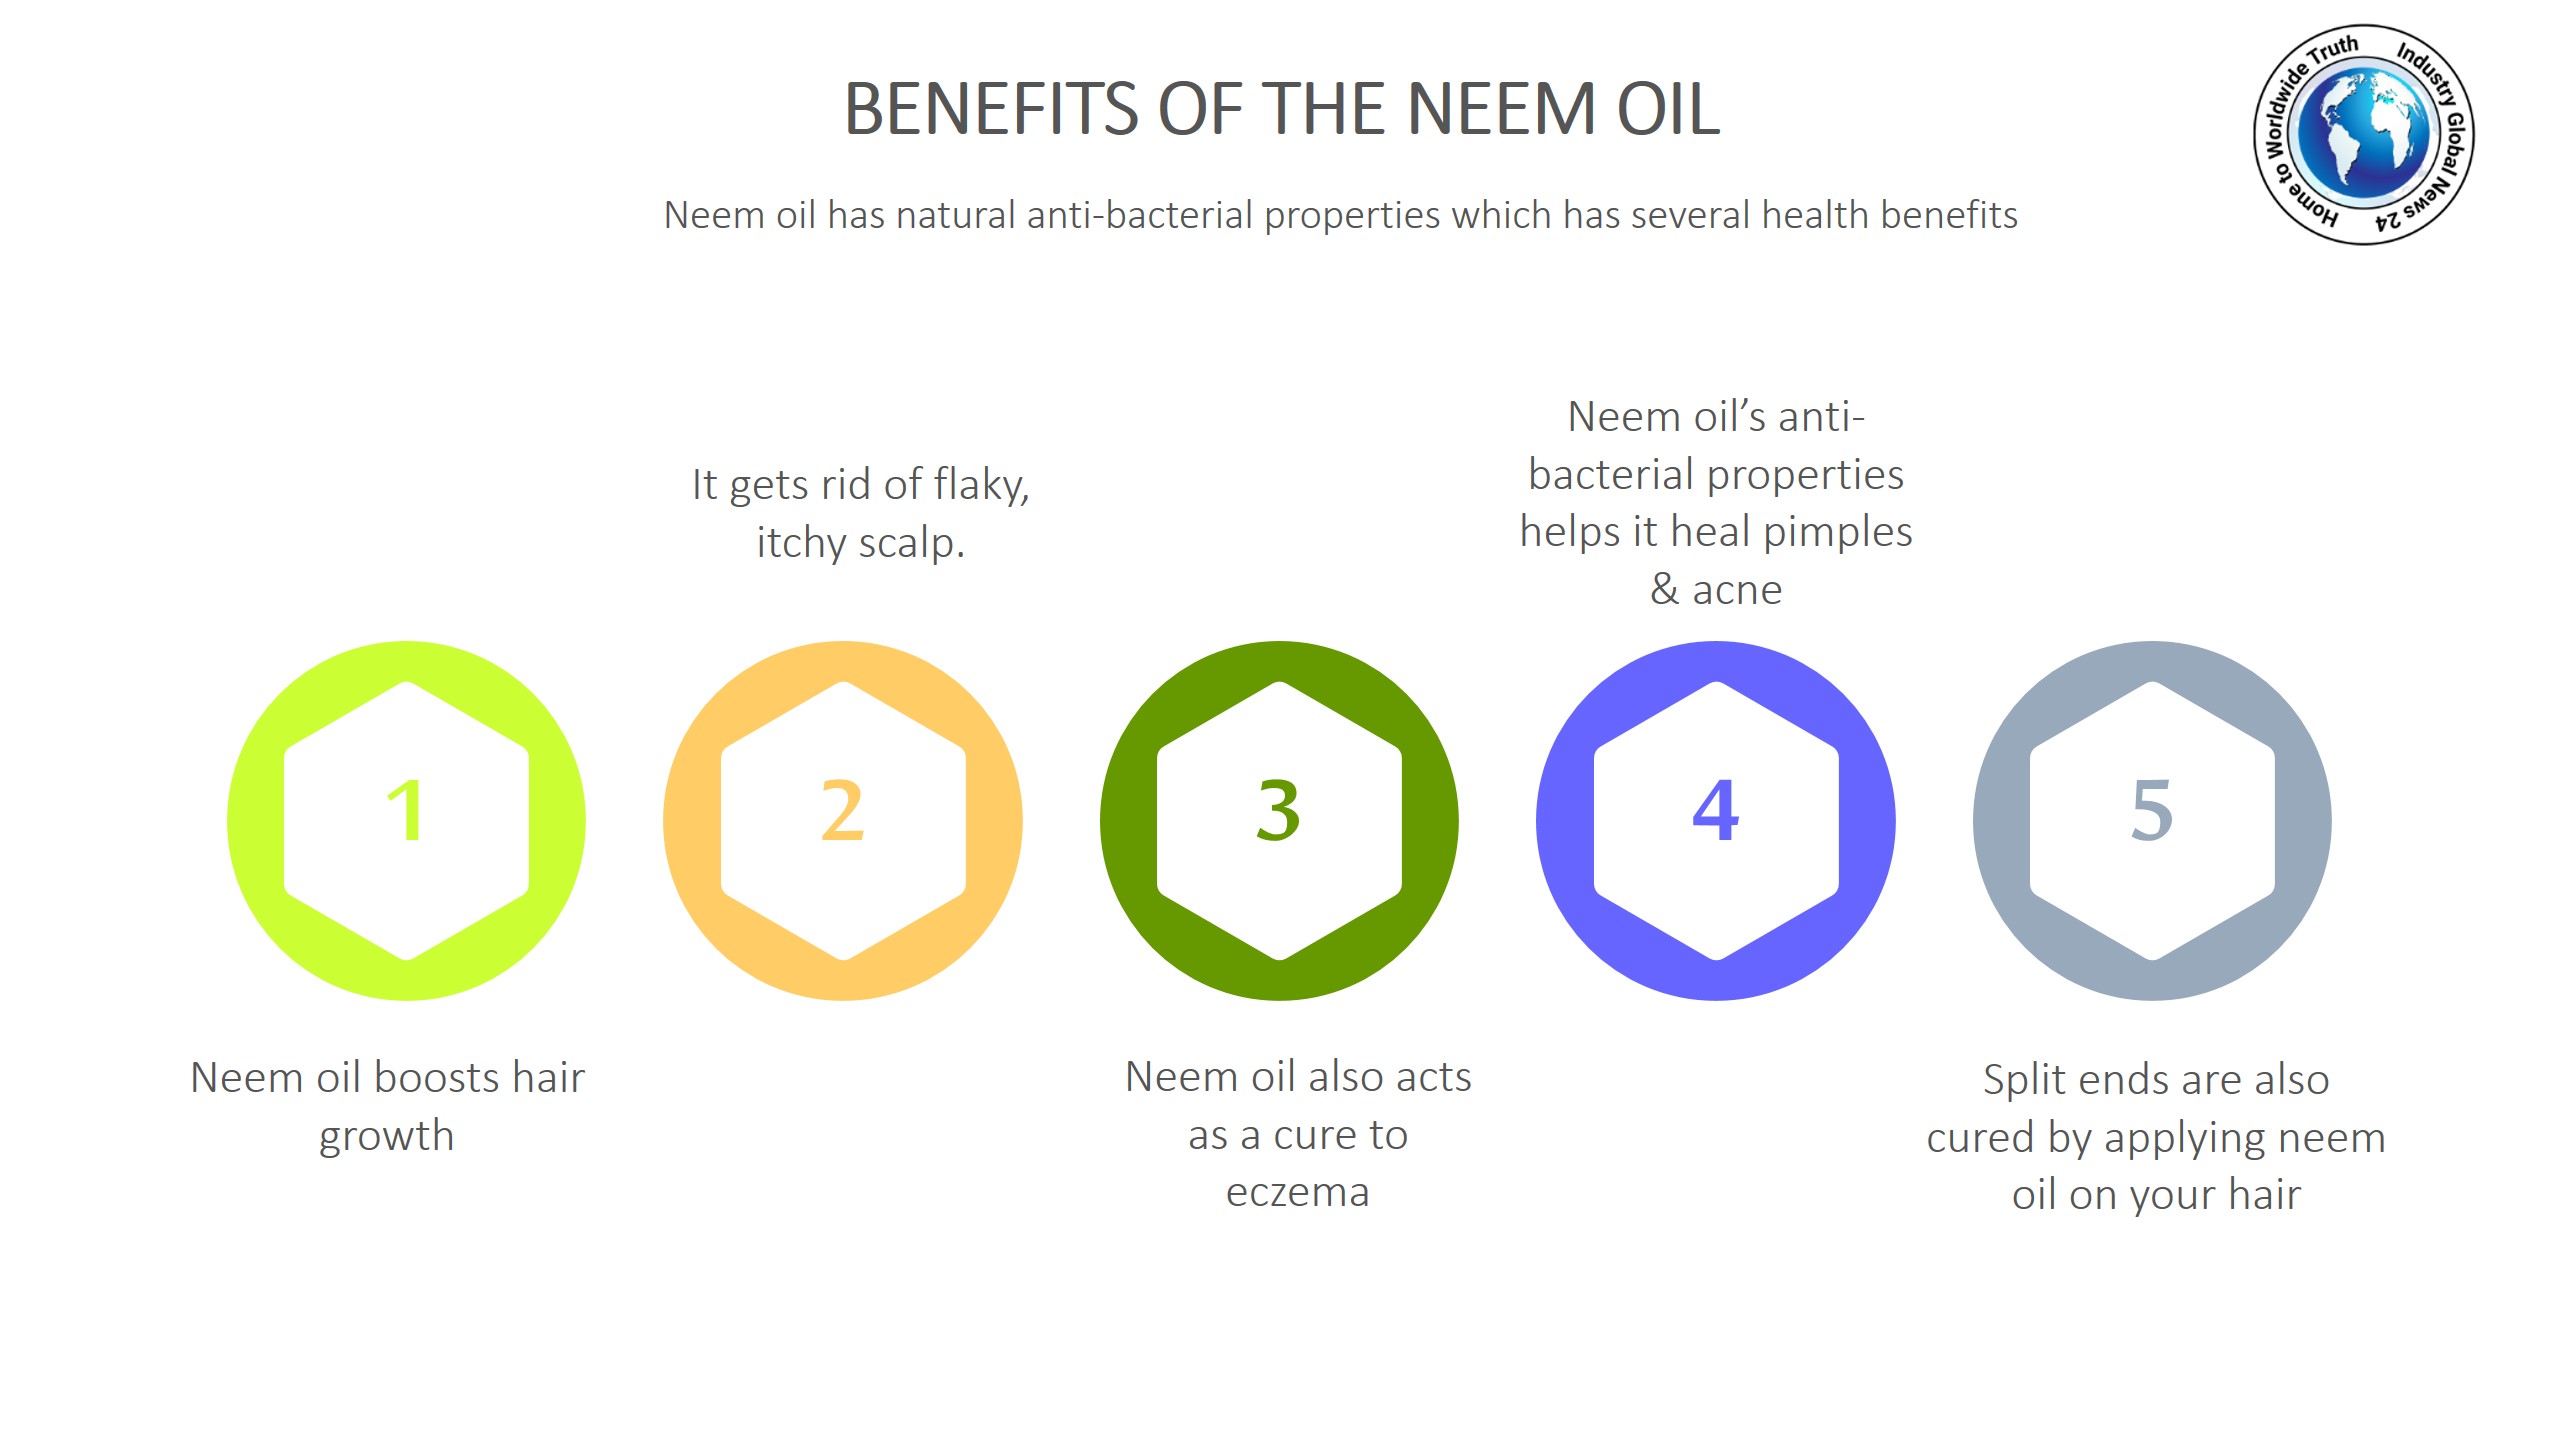 Benefits of the neem oil